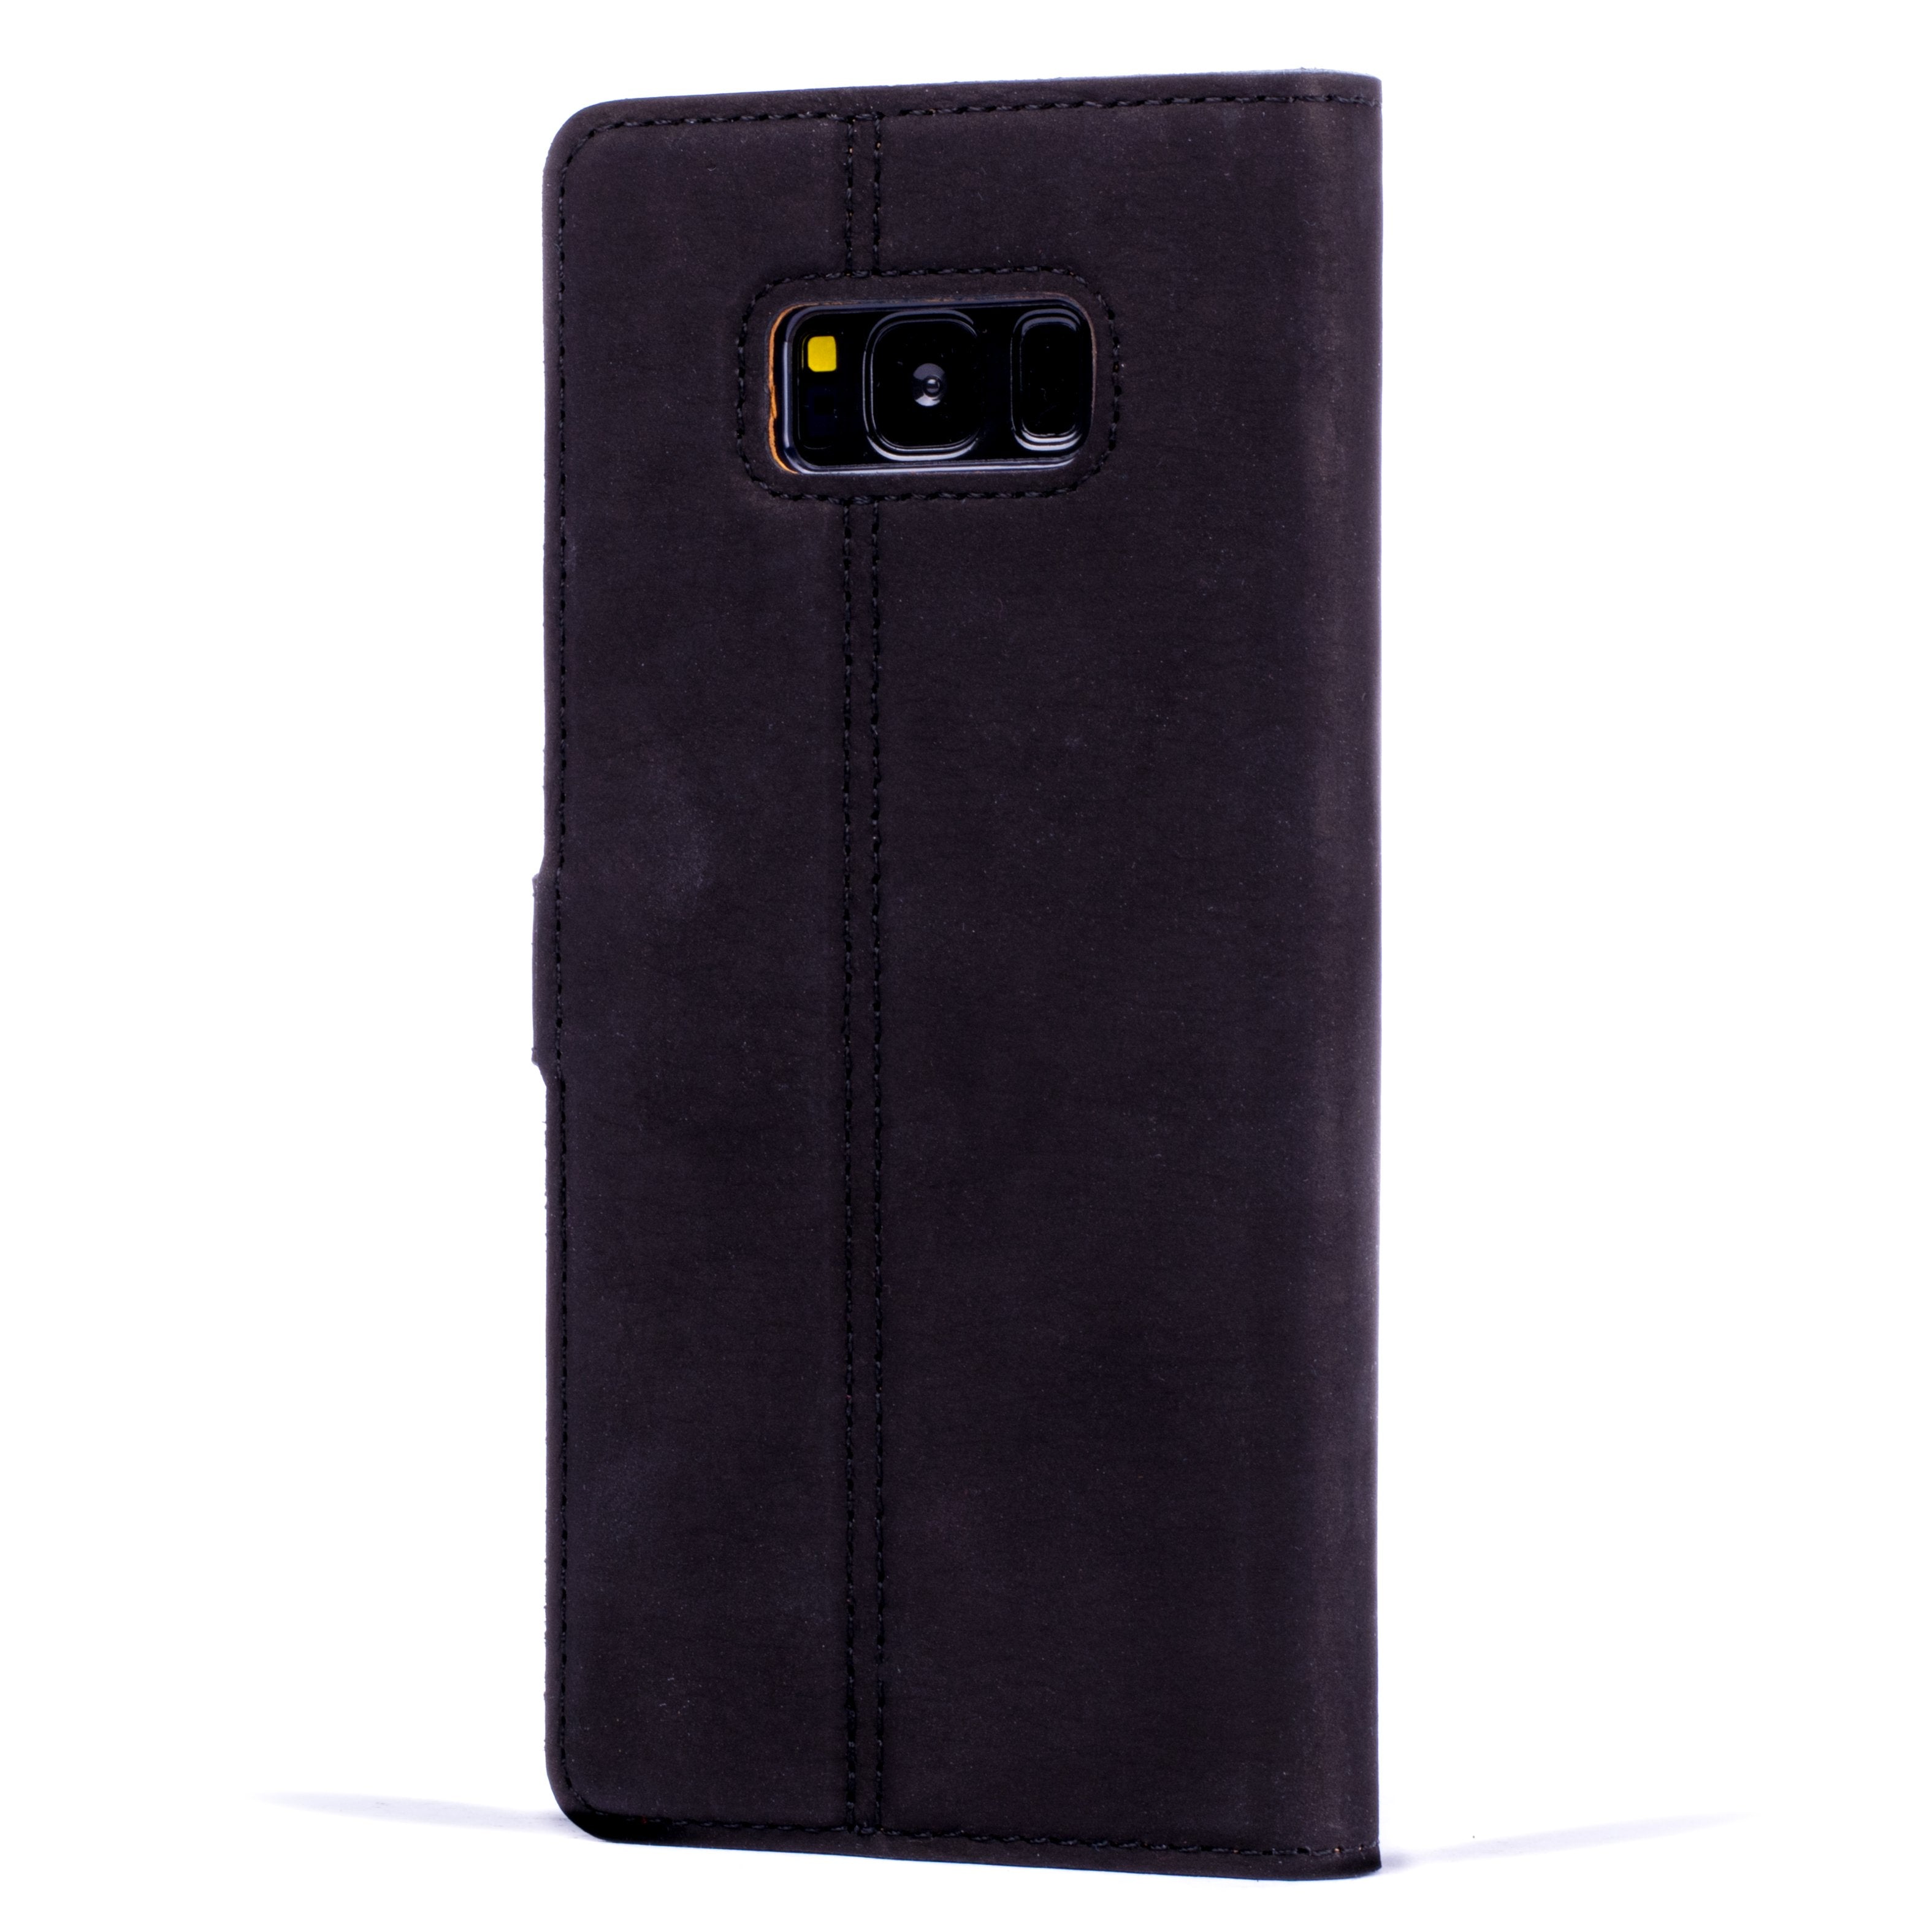 Samsung Galaxy S8 Plus - Vintage Leather Wallet (Almost Perfect)